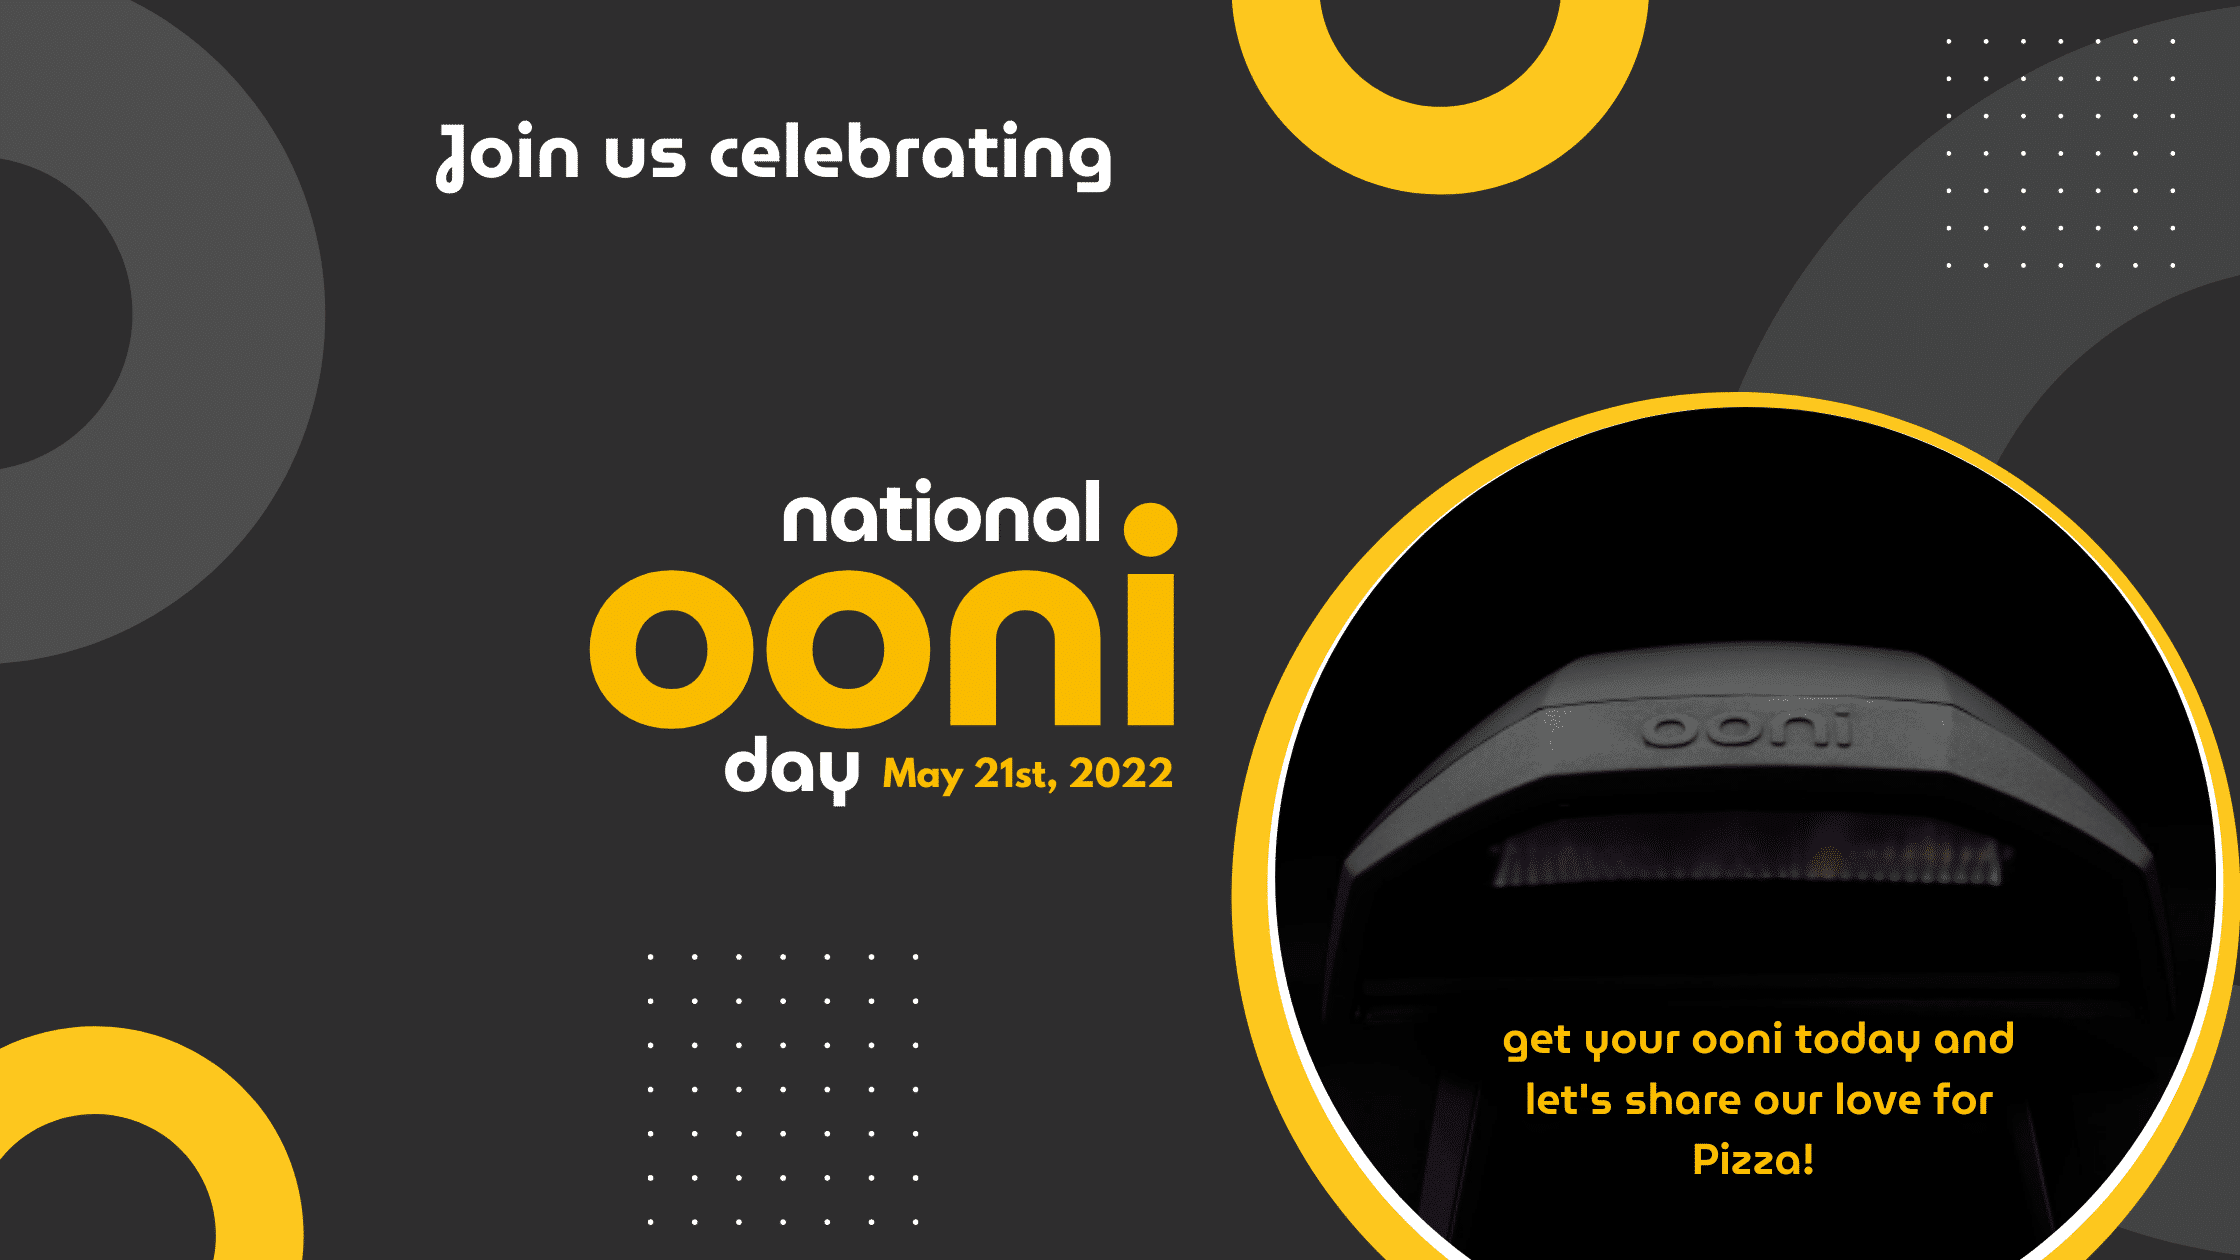 Ooni Day:  Join Us in Celebrating Ooni Day on May 21st, 2022